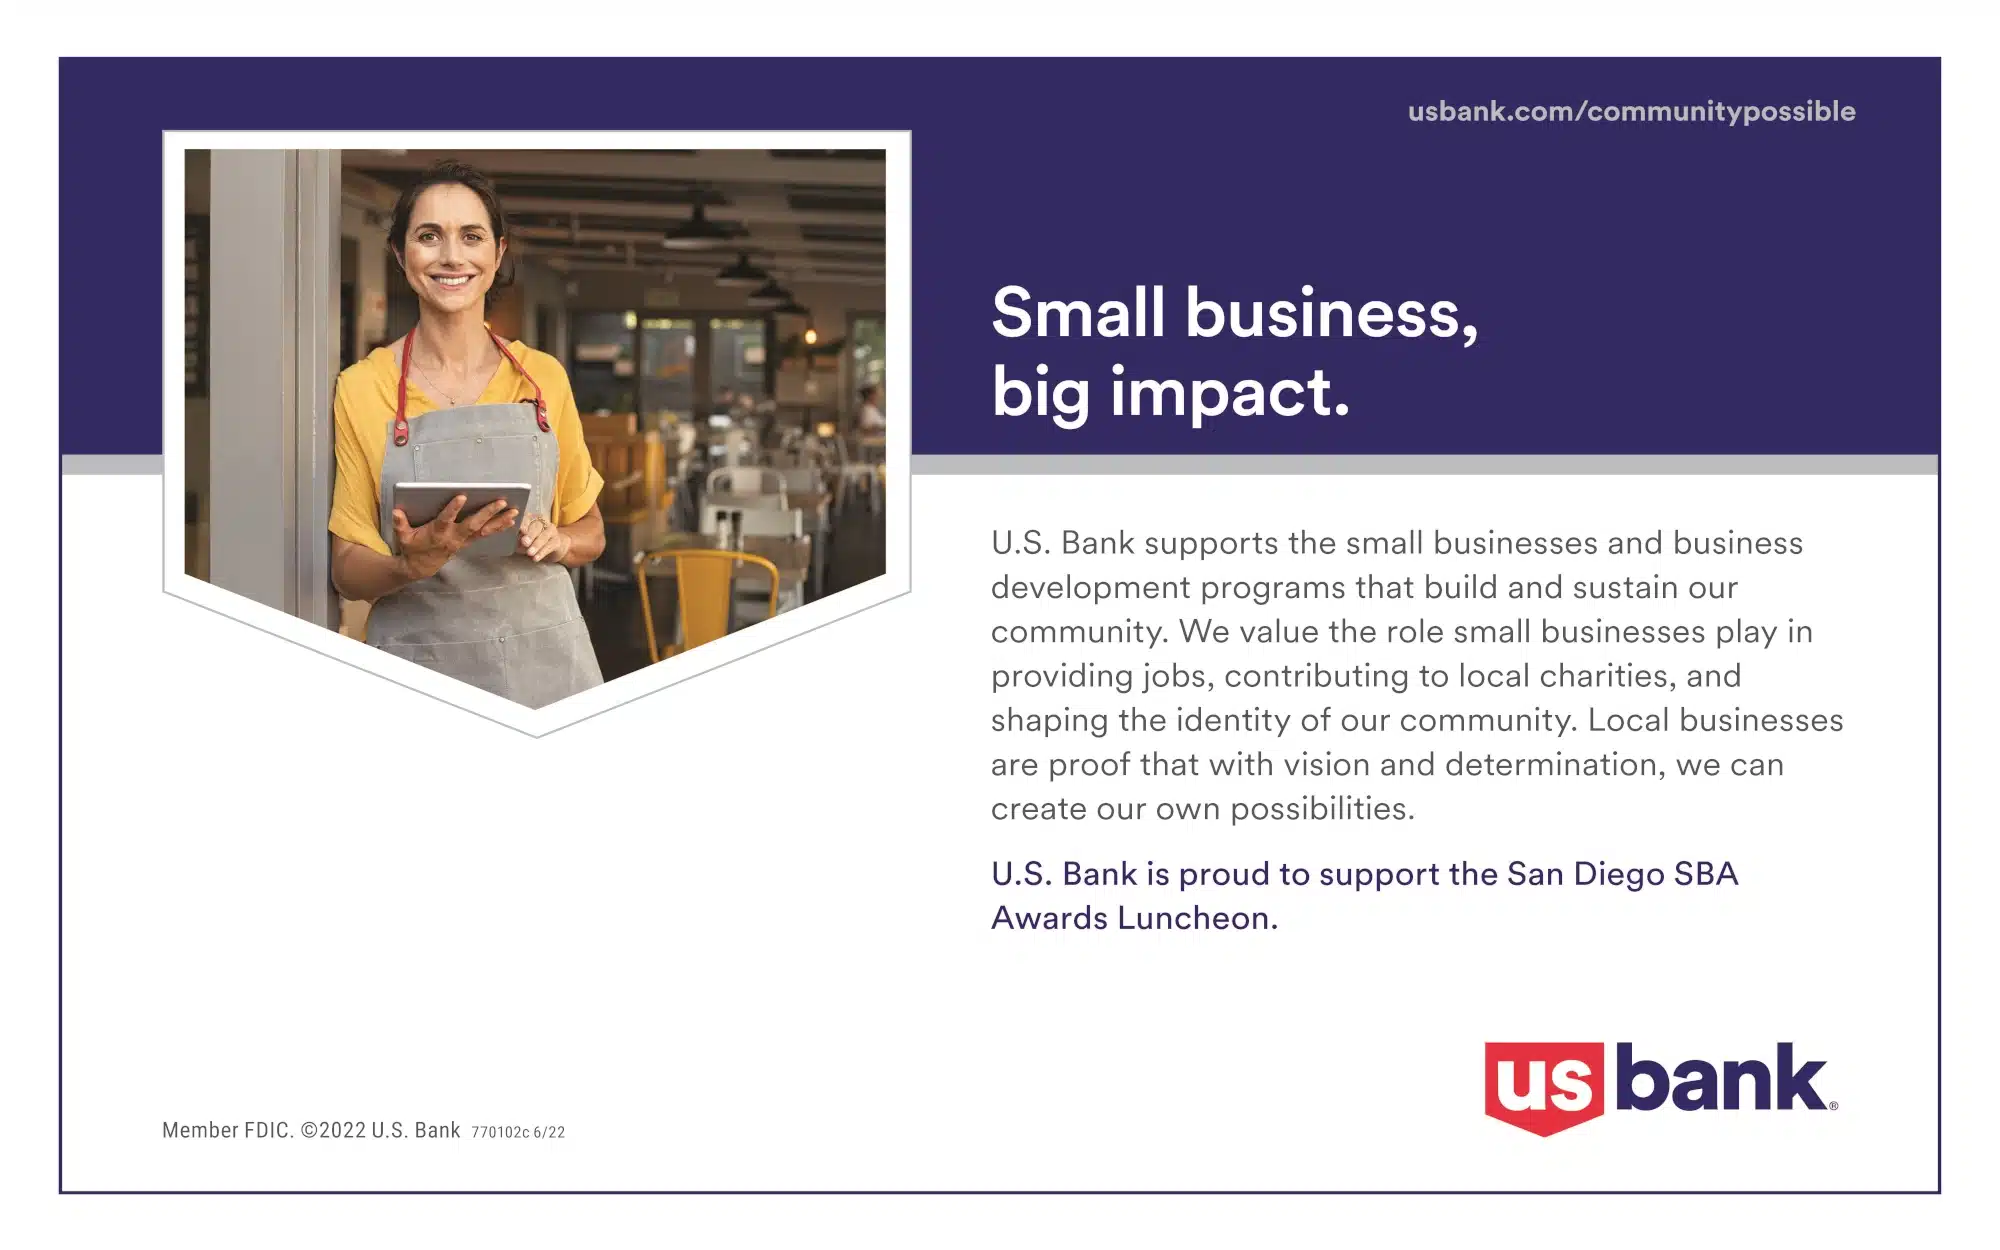 Small business, big impact by US Bank. Bank